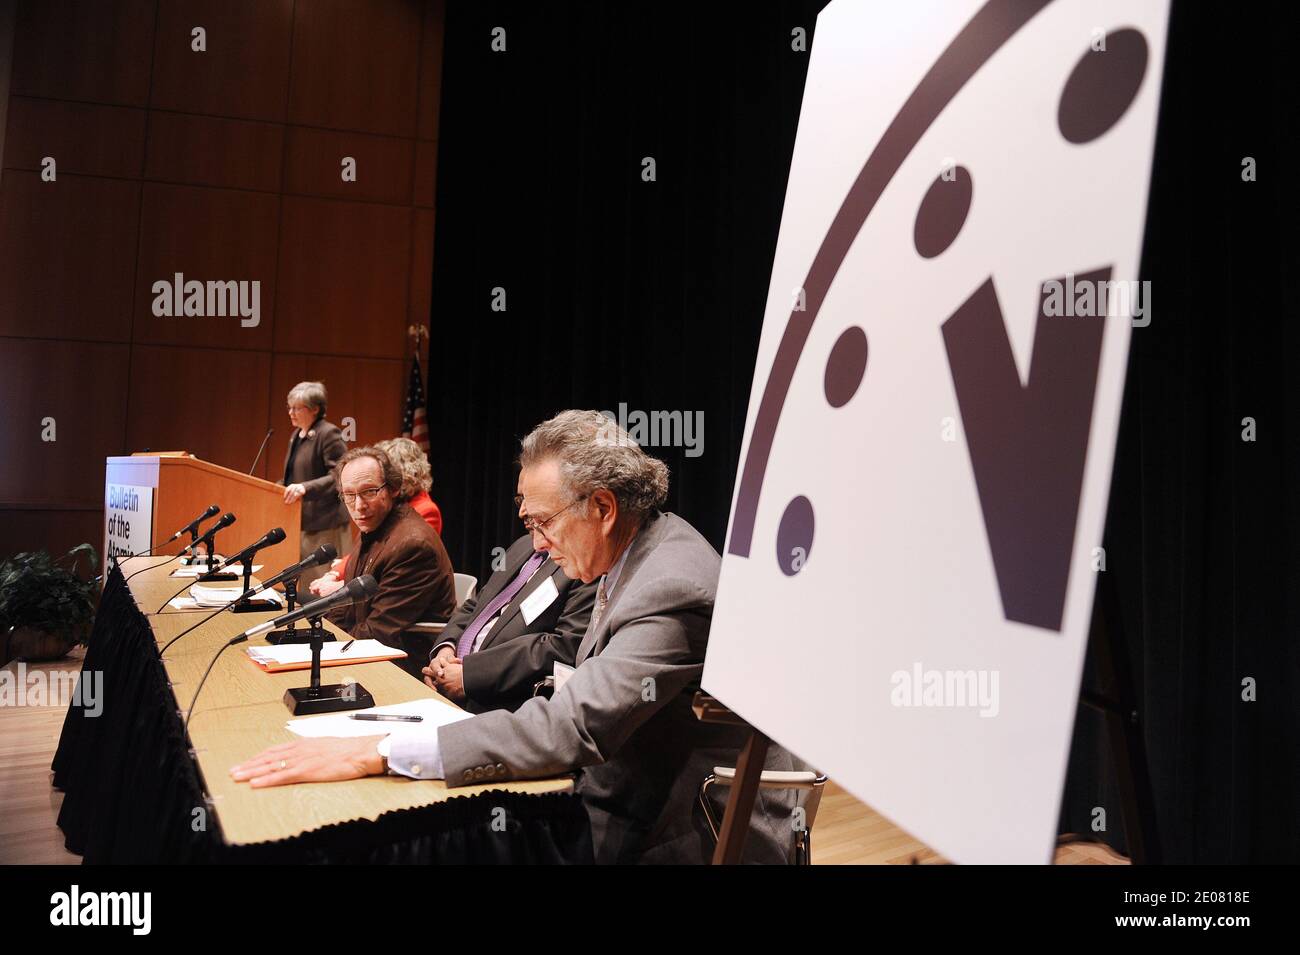 The Bulletin of the Atomic Scientists has reset the 'Doomsday Clock' to 5 minutes before midnight, a minute closer to humanity's imminent destruction, symbolized by 'midnight,' than last year during a press conference at the AAAS Auditorium January 10, 2012 in Washington, DC, USA. The clock is a symbol of the threat of humanity's imminent destruction from nuclear or biological weapons, climate change and other human-caused disasters. Photo by Olivier Douliery/ABACAPRESS.COM Stock Photo